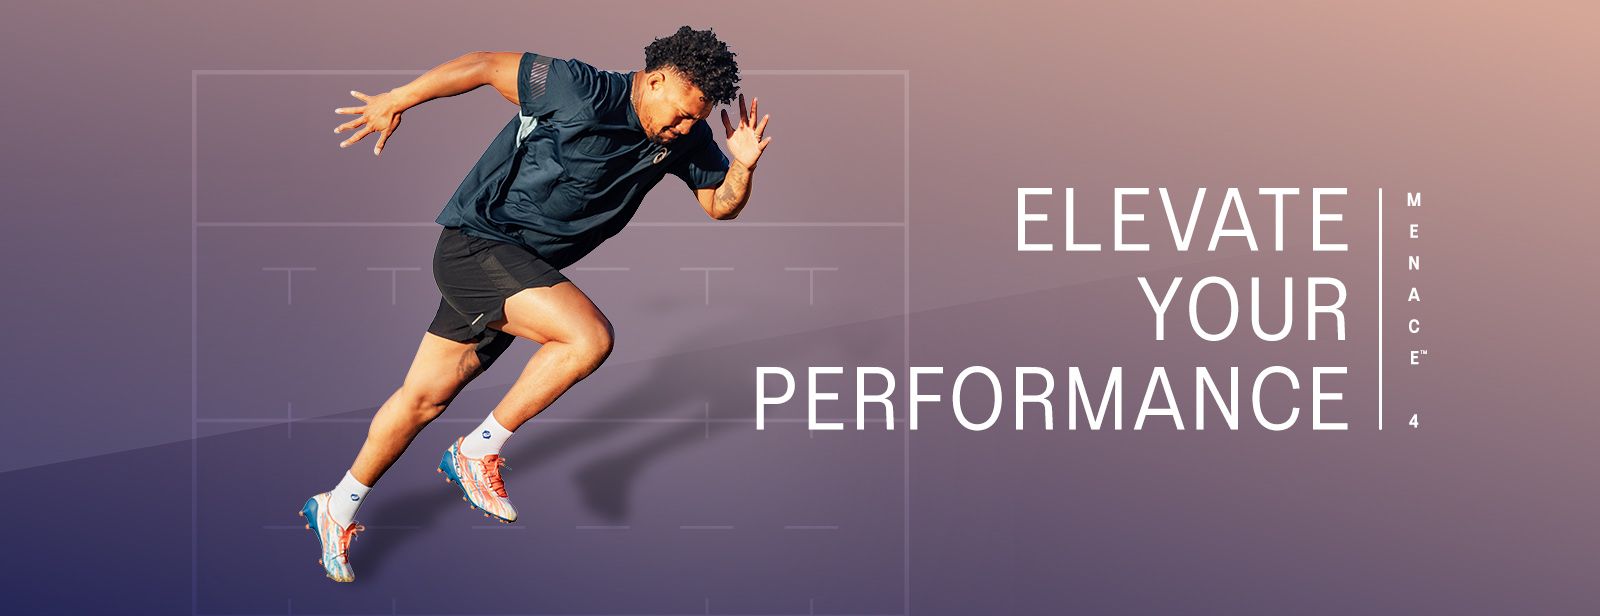 Elevate Your Performance - Menace 4 with Ardie Savea